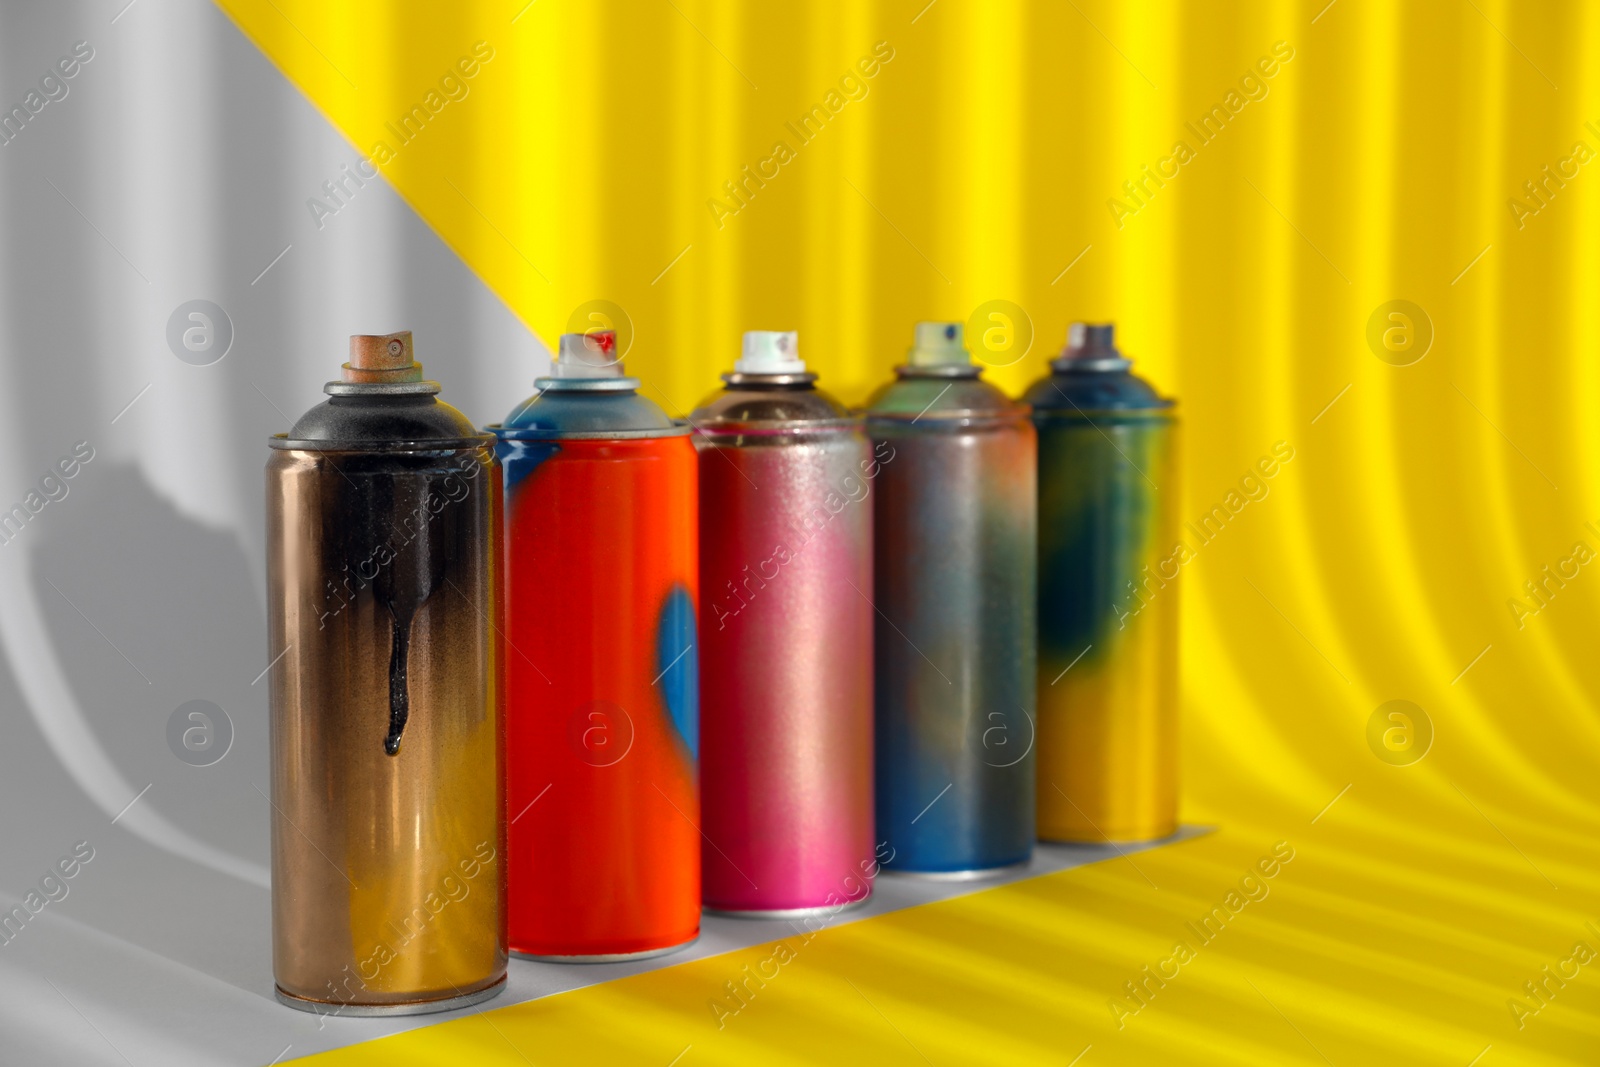 Photo of Used cans of spray paints on color background